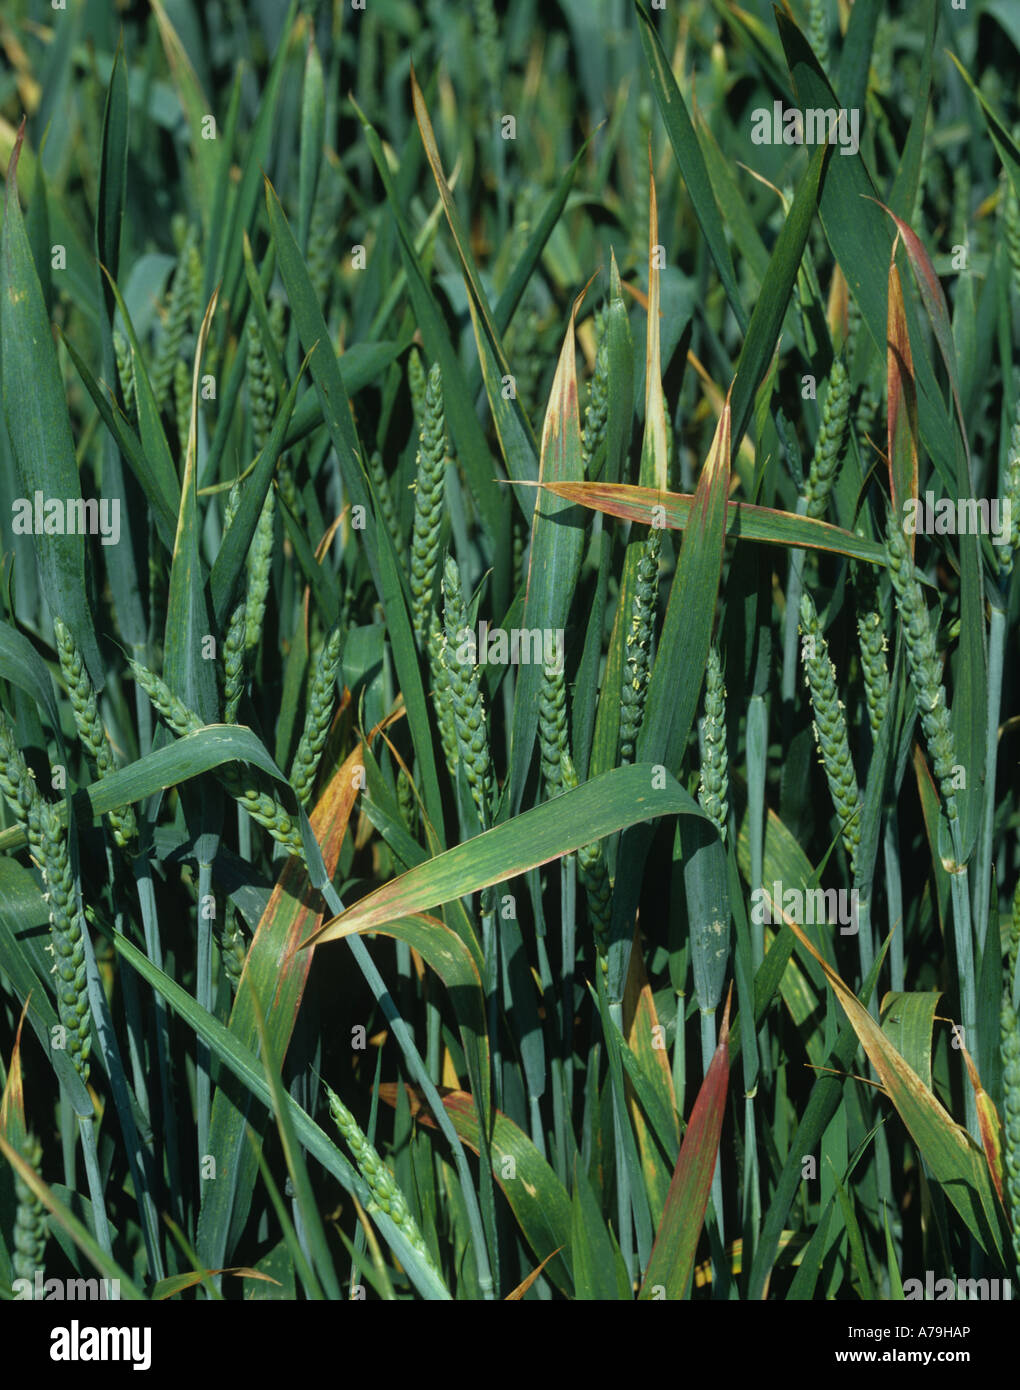 BYDV chlorosis and reddening on leaves and flag leaves of a wheat crop in ear Stock Photo